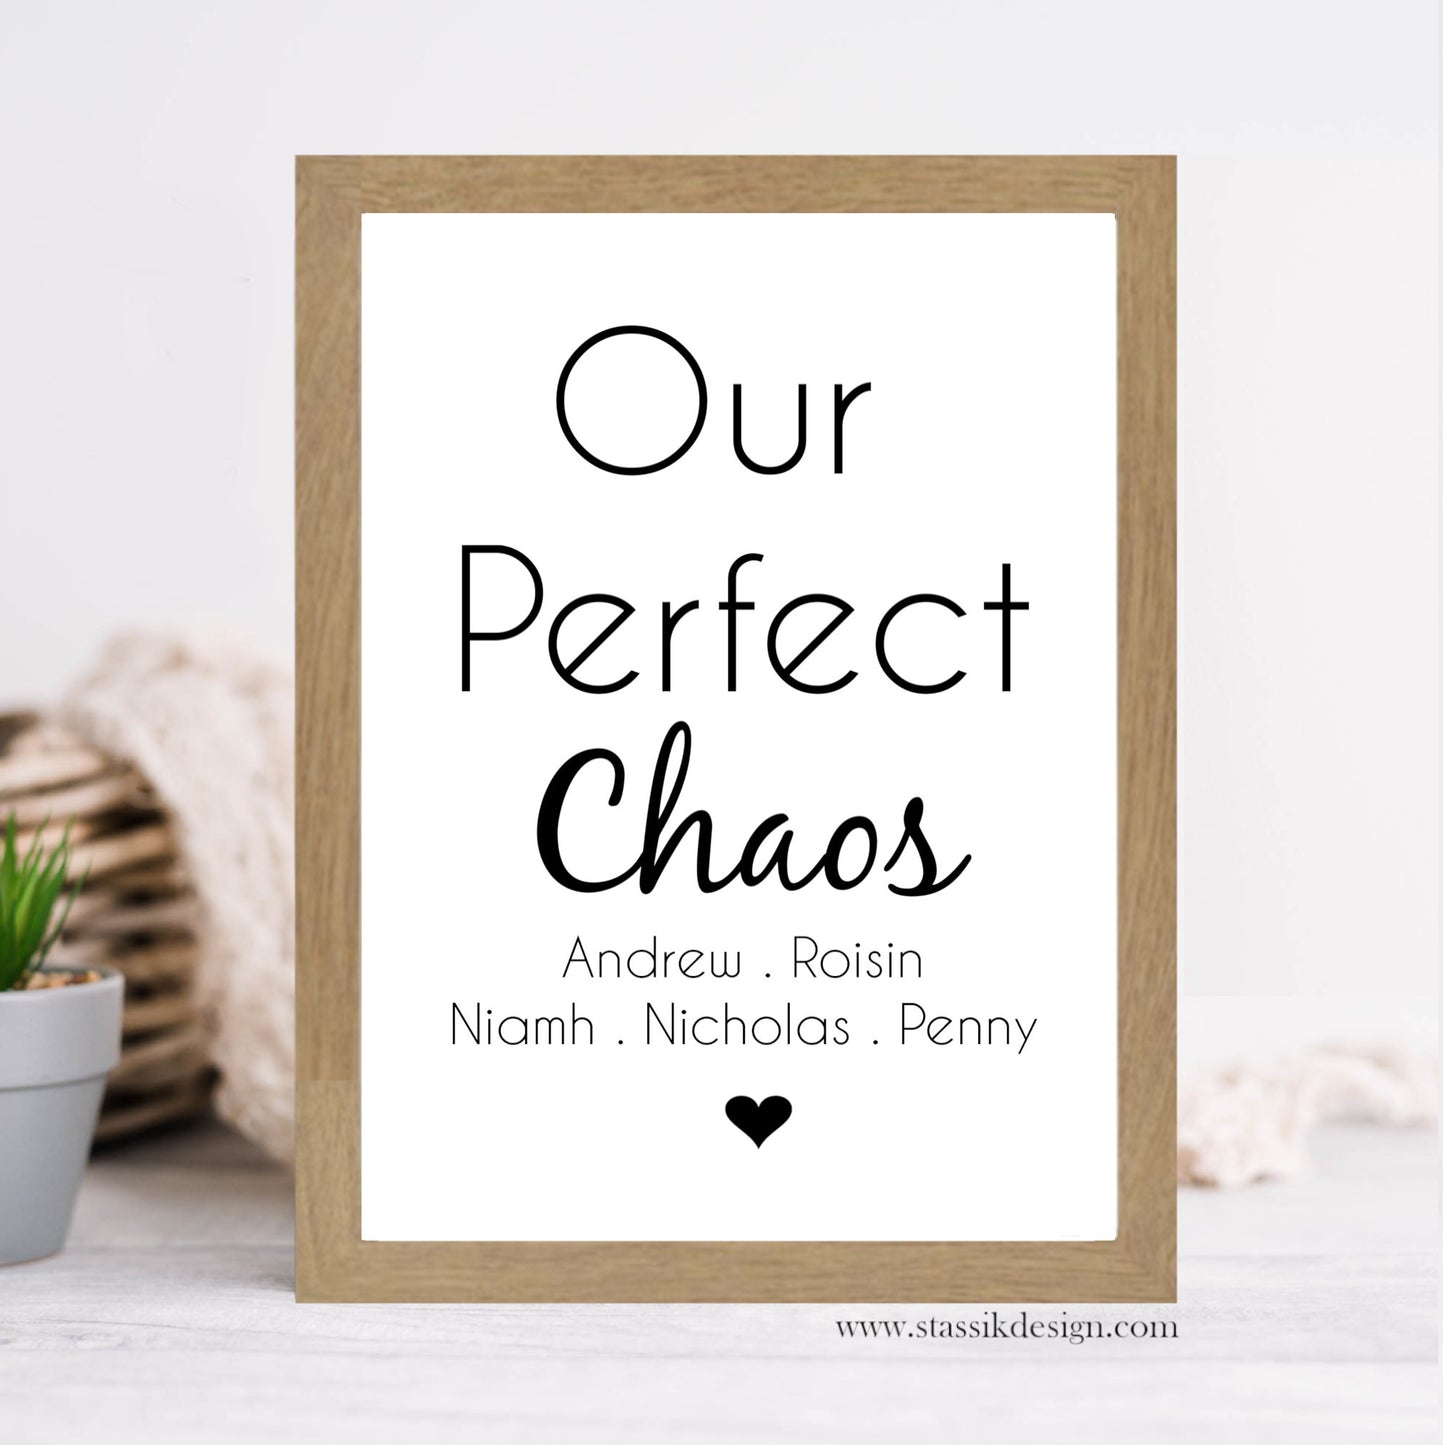 Personalised Print - 'Our Perfect Chaos'